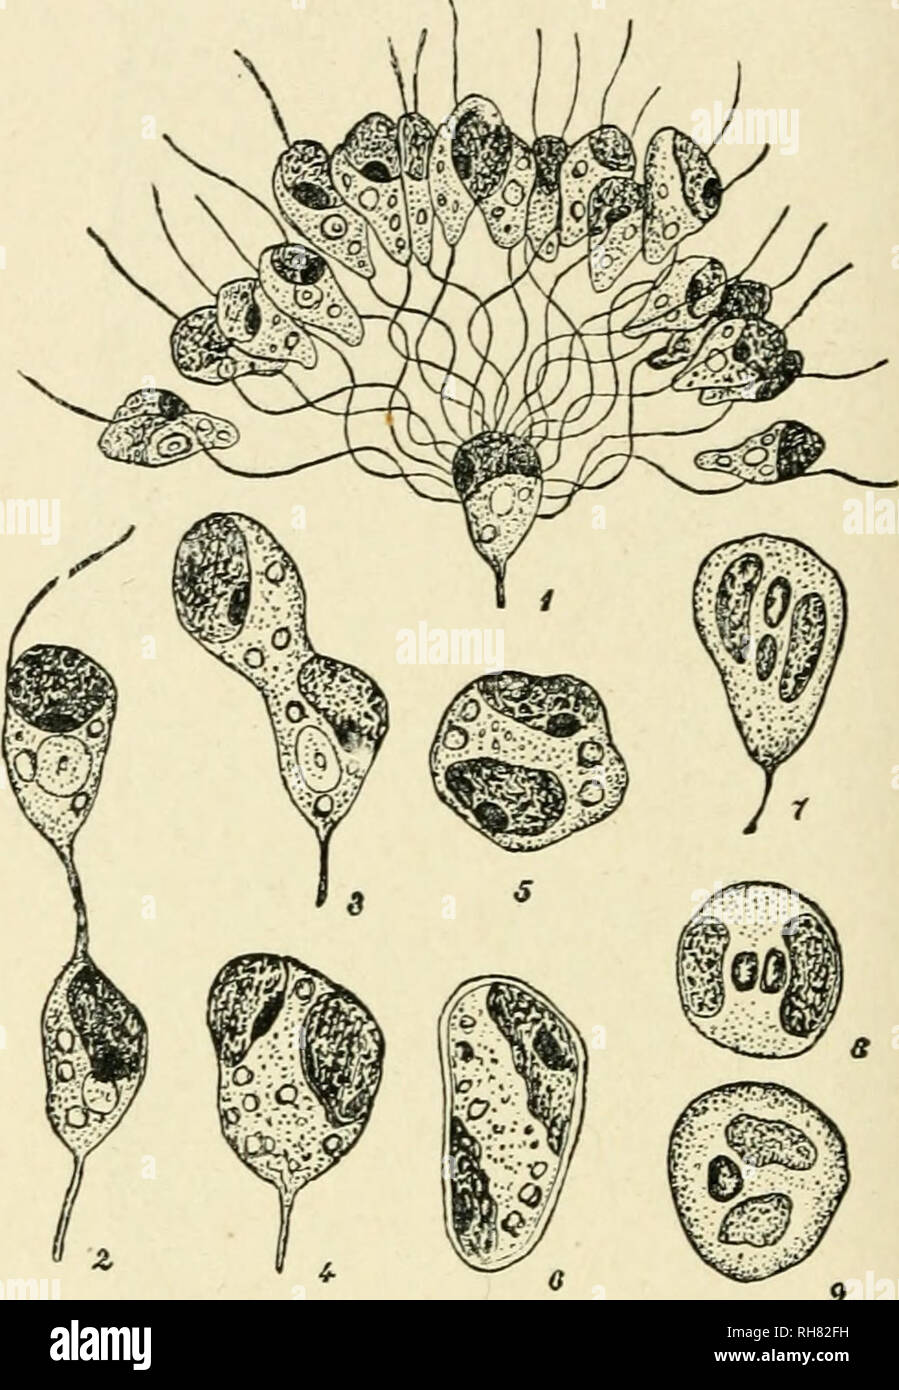 . Botany of the living plant. Botany. Fig. 320. A, Pleurocladia lacustris. Uni- locular sporangium with its contents divided up into zoospores, a = eye- spot. c/tr=chromatophore. (After Klebahn.j B = Chorda filum, zoo- spores. (After Reinke.) (From Oltmanns' Algae.). Fig. 321. Ectocarpus siliculosus. i, female gamete sur- rounded by a number of male gametes. 2-5, stages in the fusion of gametes. 6, zygote after 24 hours. 7-9, fusion of the nuclei as seen in fixed and stained material. (1-5 after Berthold ; 6-9 after Oltmanns.) (From Strasburger.) in conceptacles, which are cavities hollowed ou Stock Photo